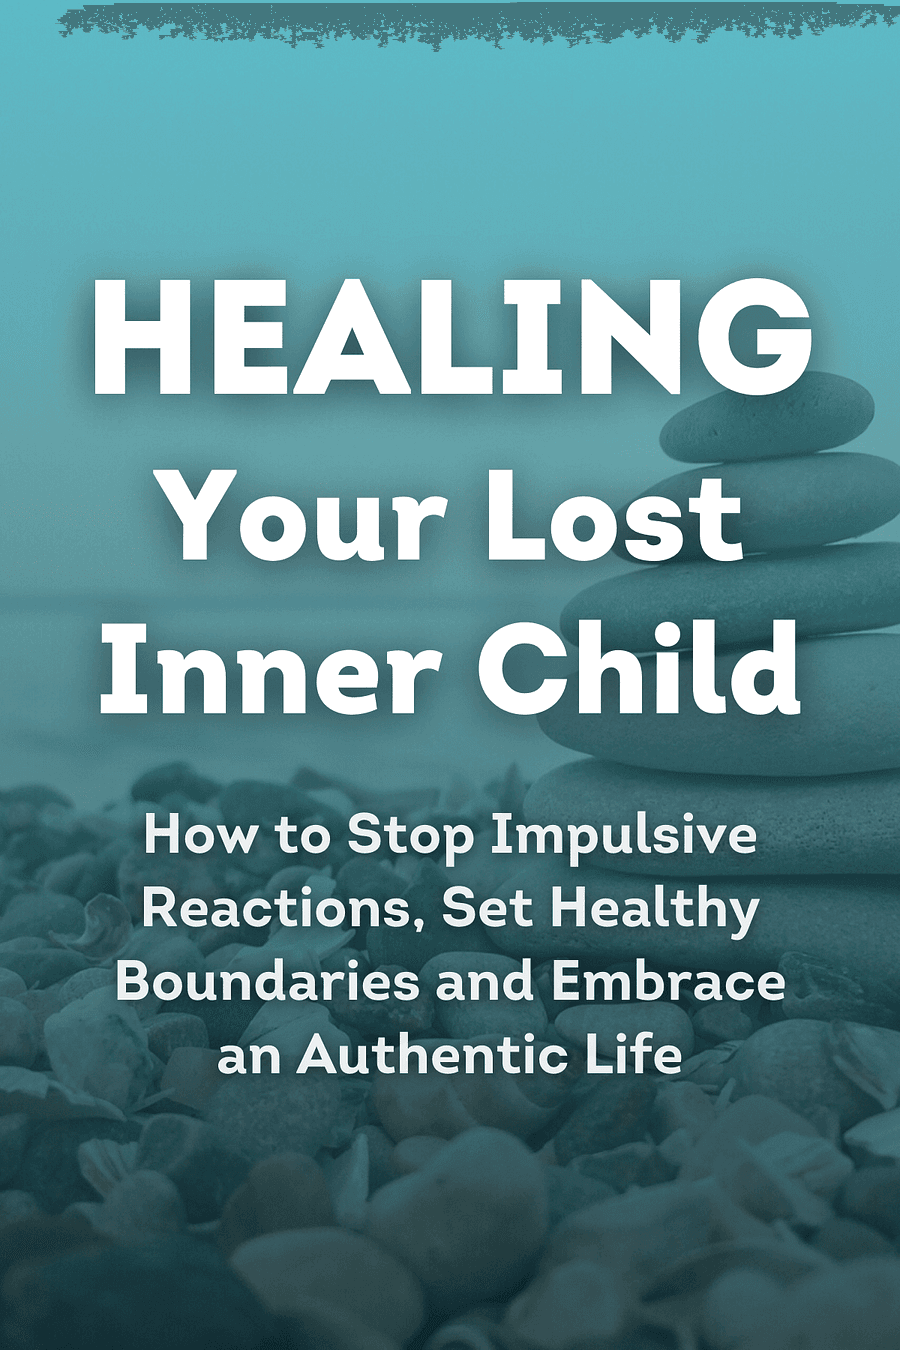 Healing Your Lost Inner Child by Robert Jackman - Book Summary